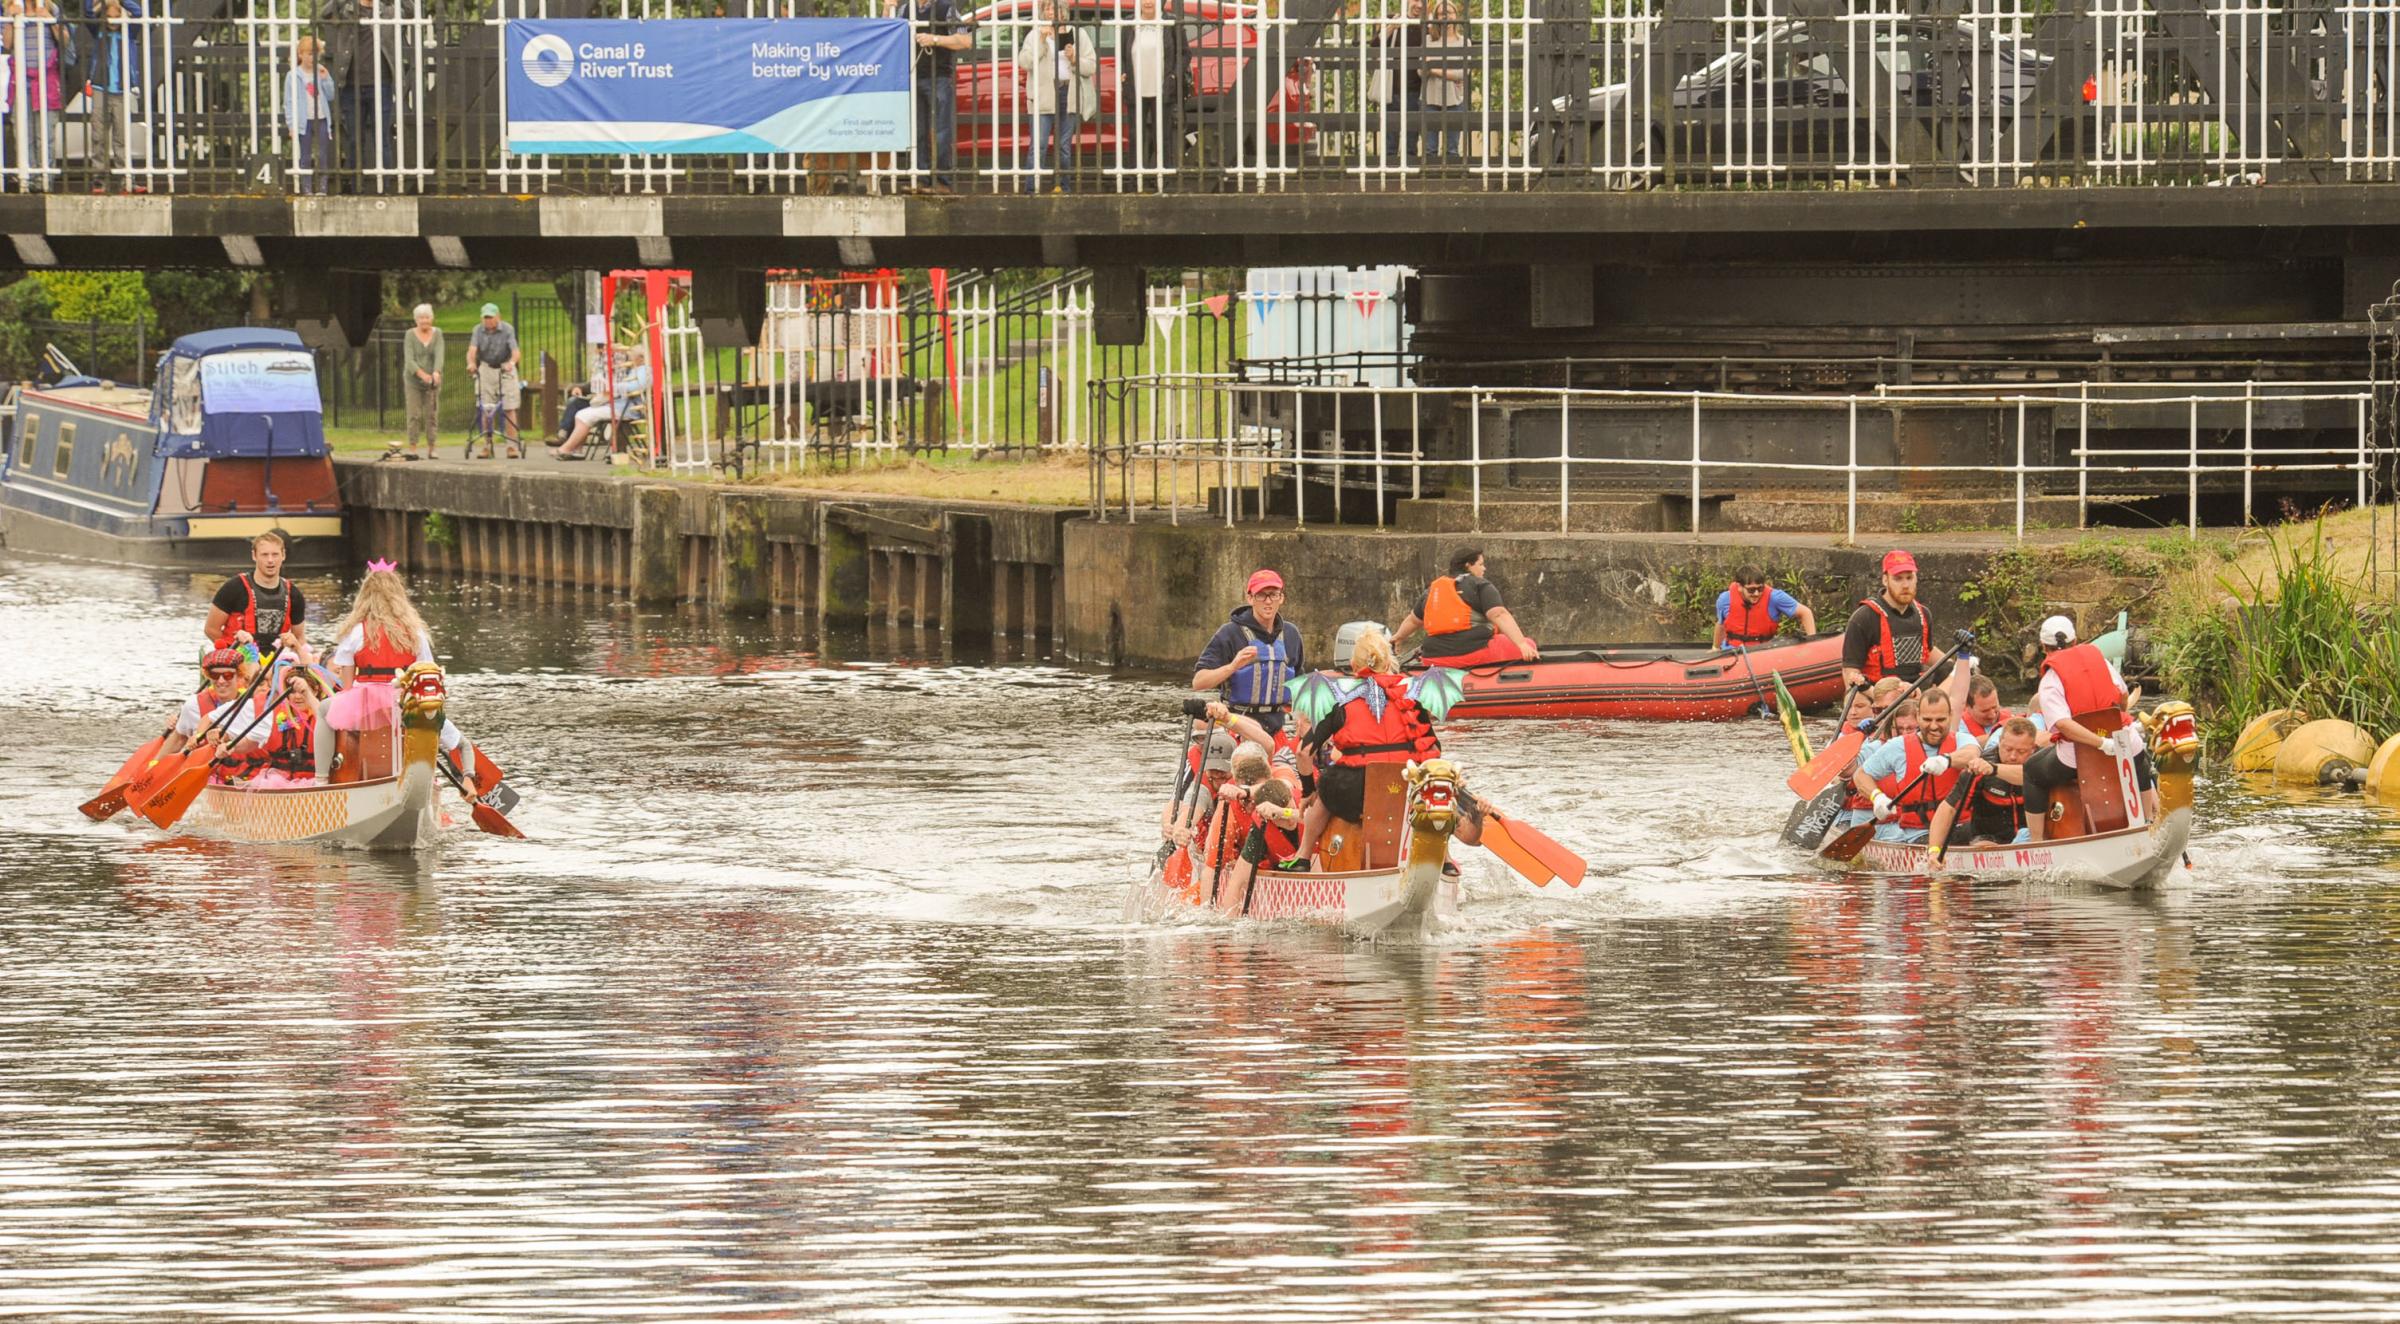 Northwich Barons Quay, Northwich River Festival. Picture Start for Race No 3 The Tooth Fairies, The DCC Dragons and The Buoyant Burgers...SW1372019-15.